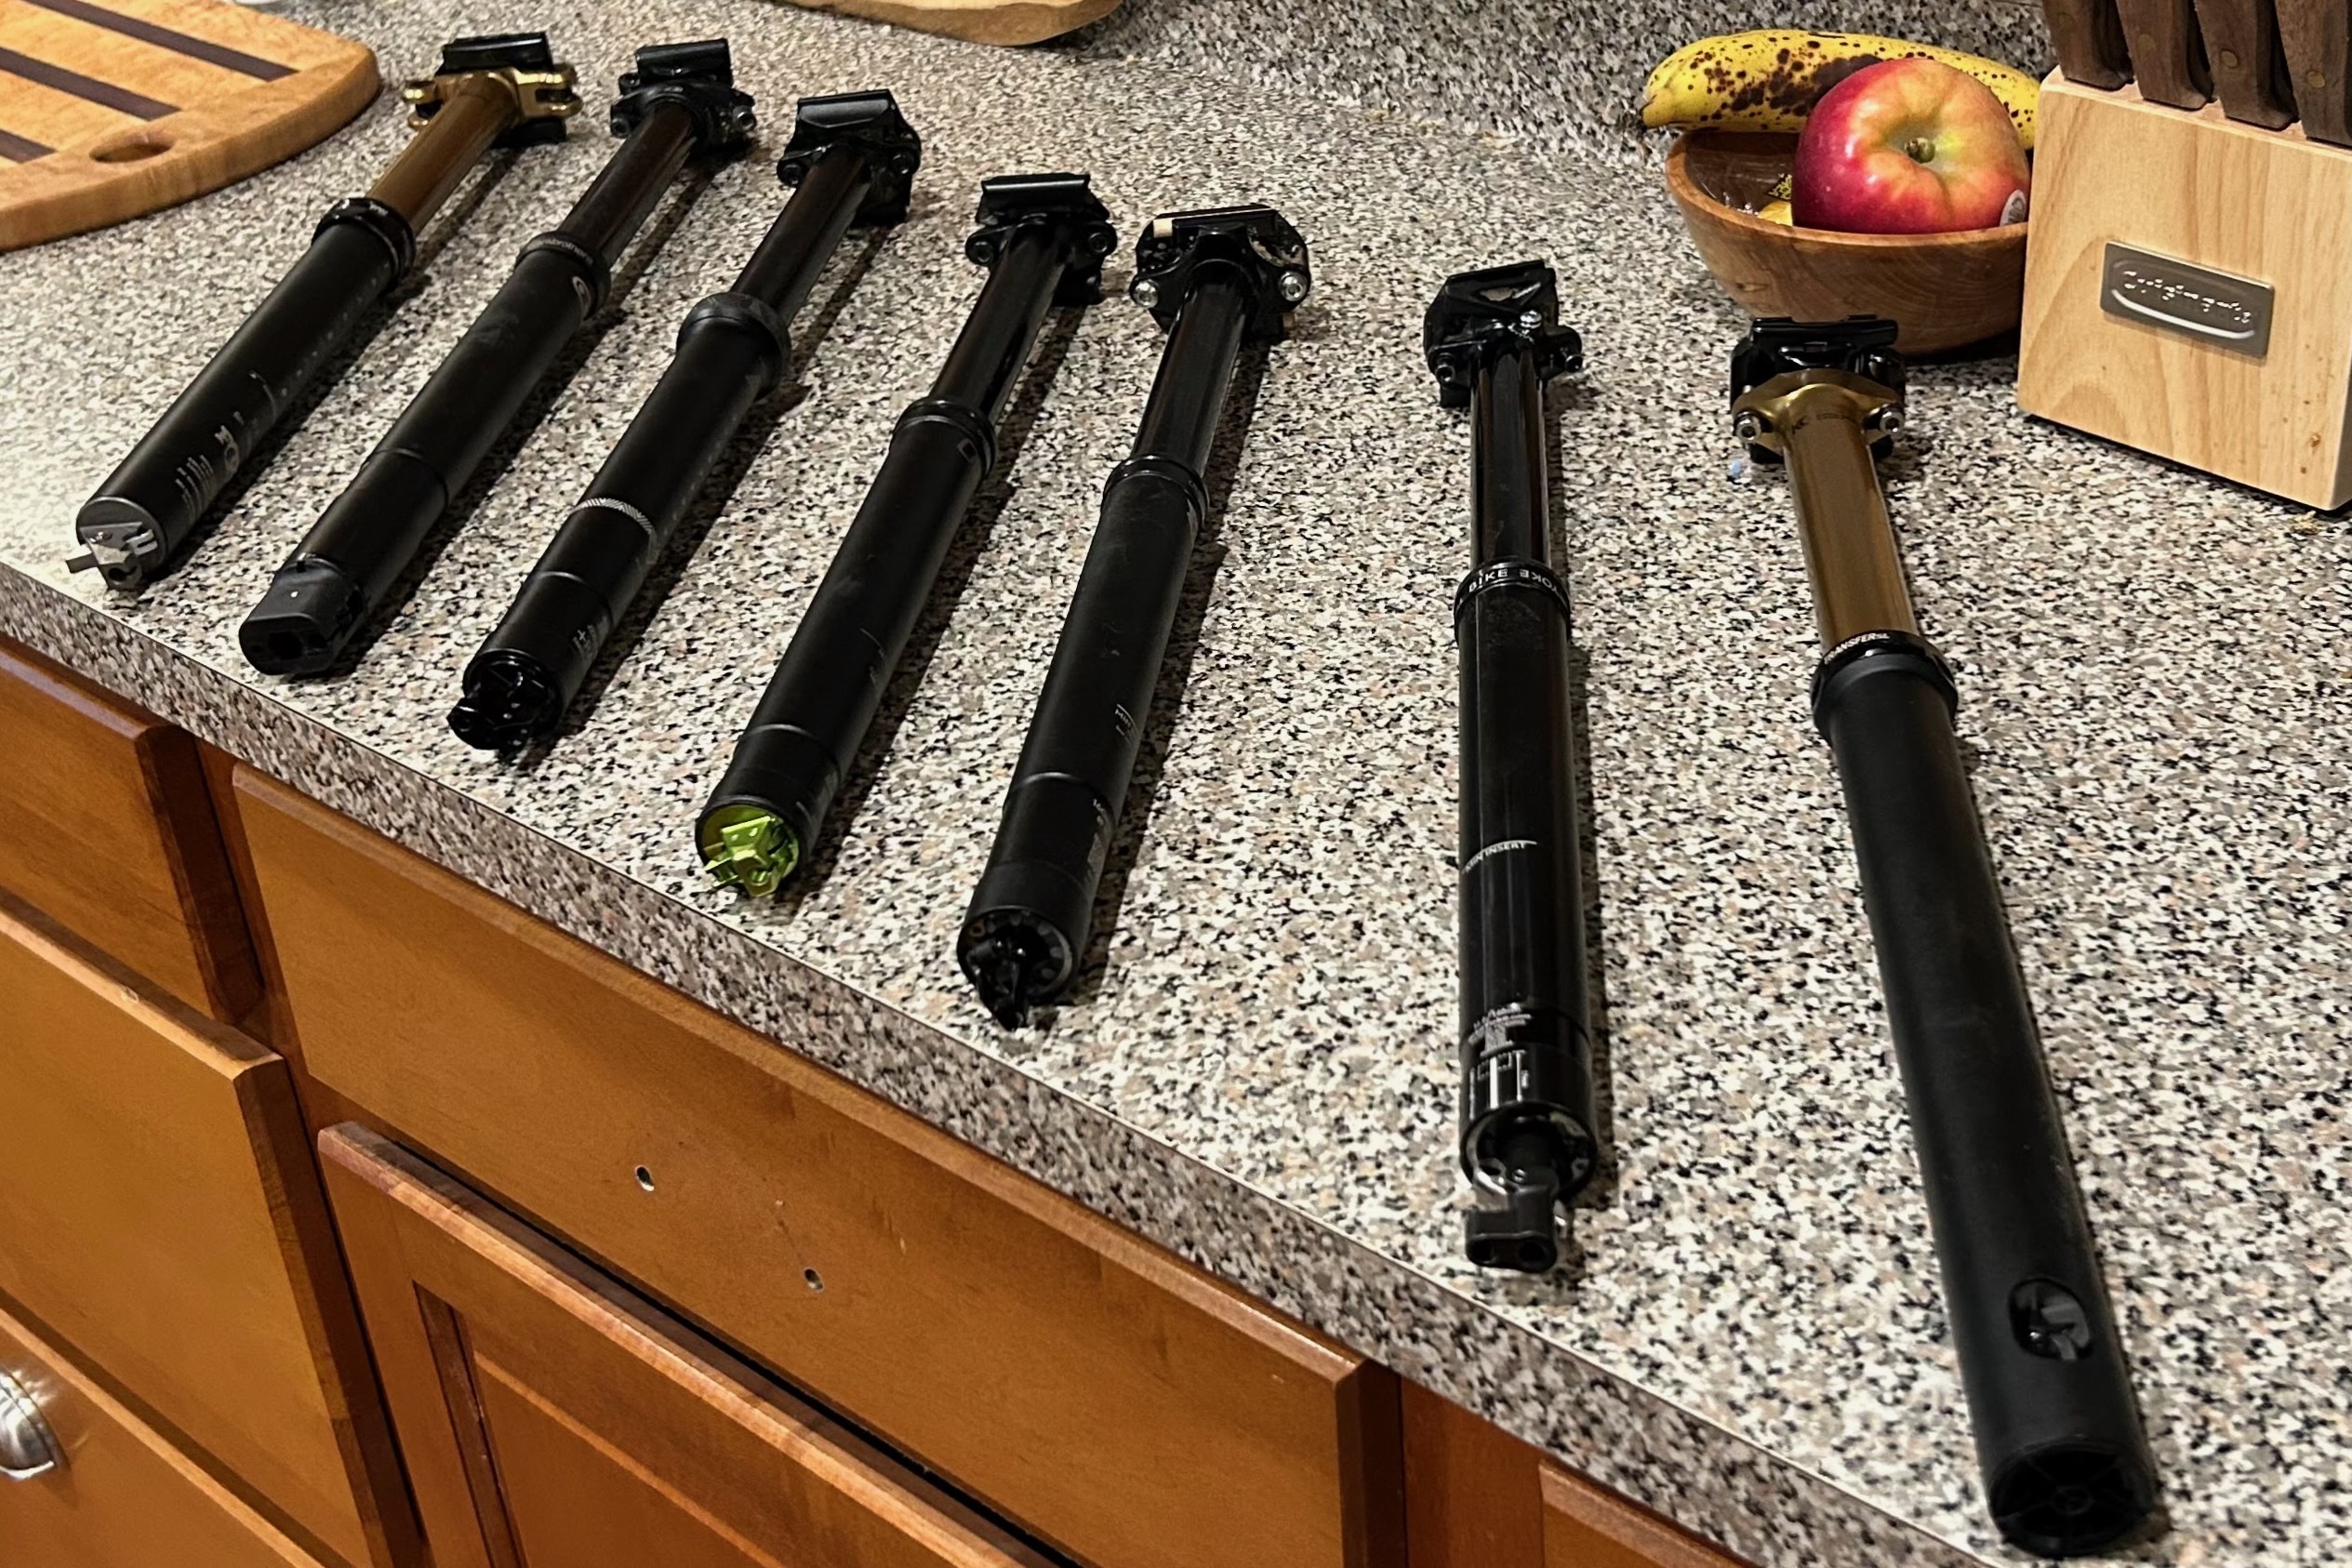 Dropper posts lined up on a counter